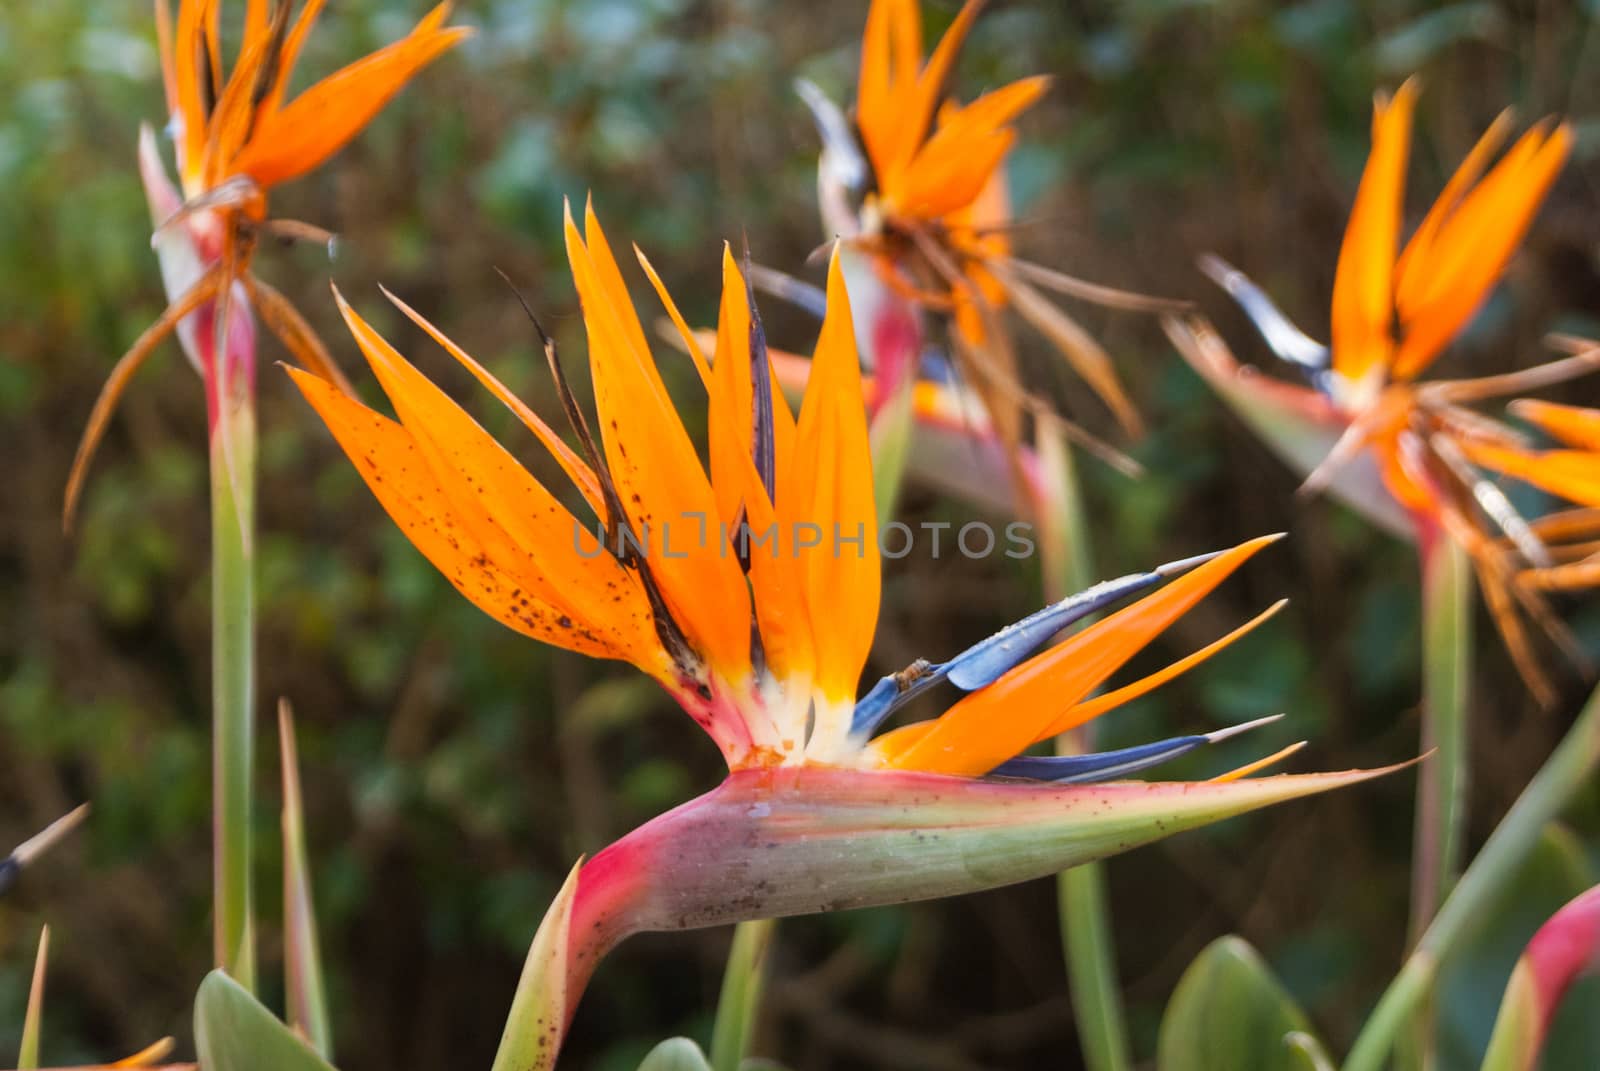 Bird of Paradise blooms by emattil